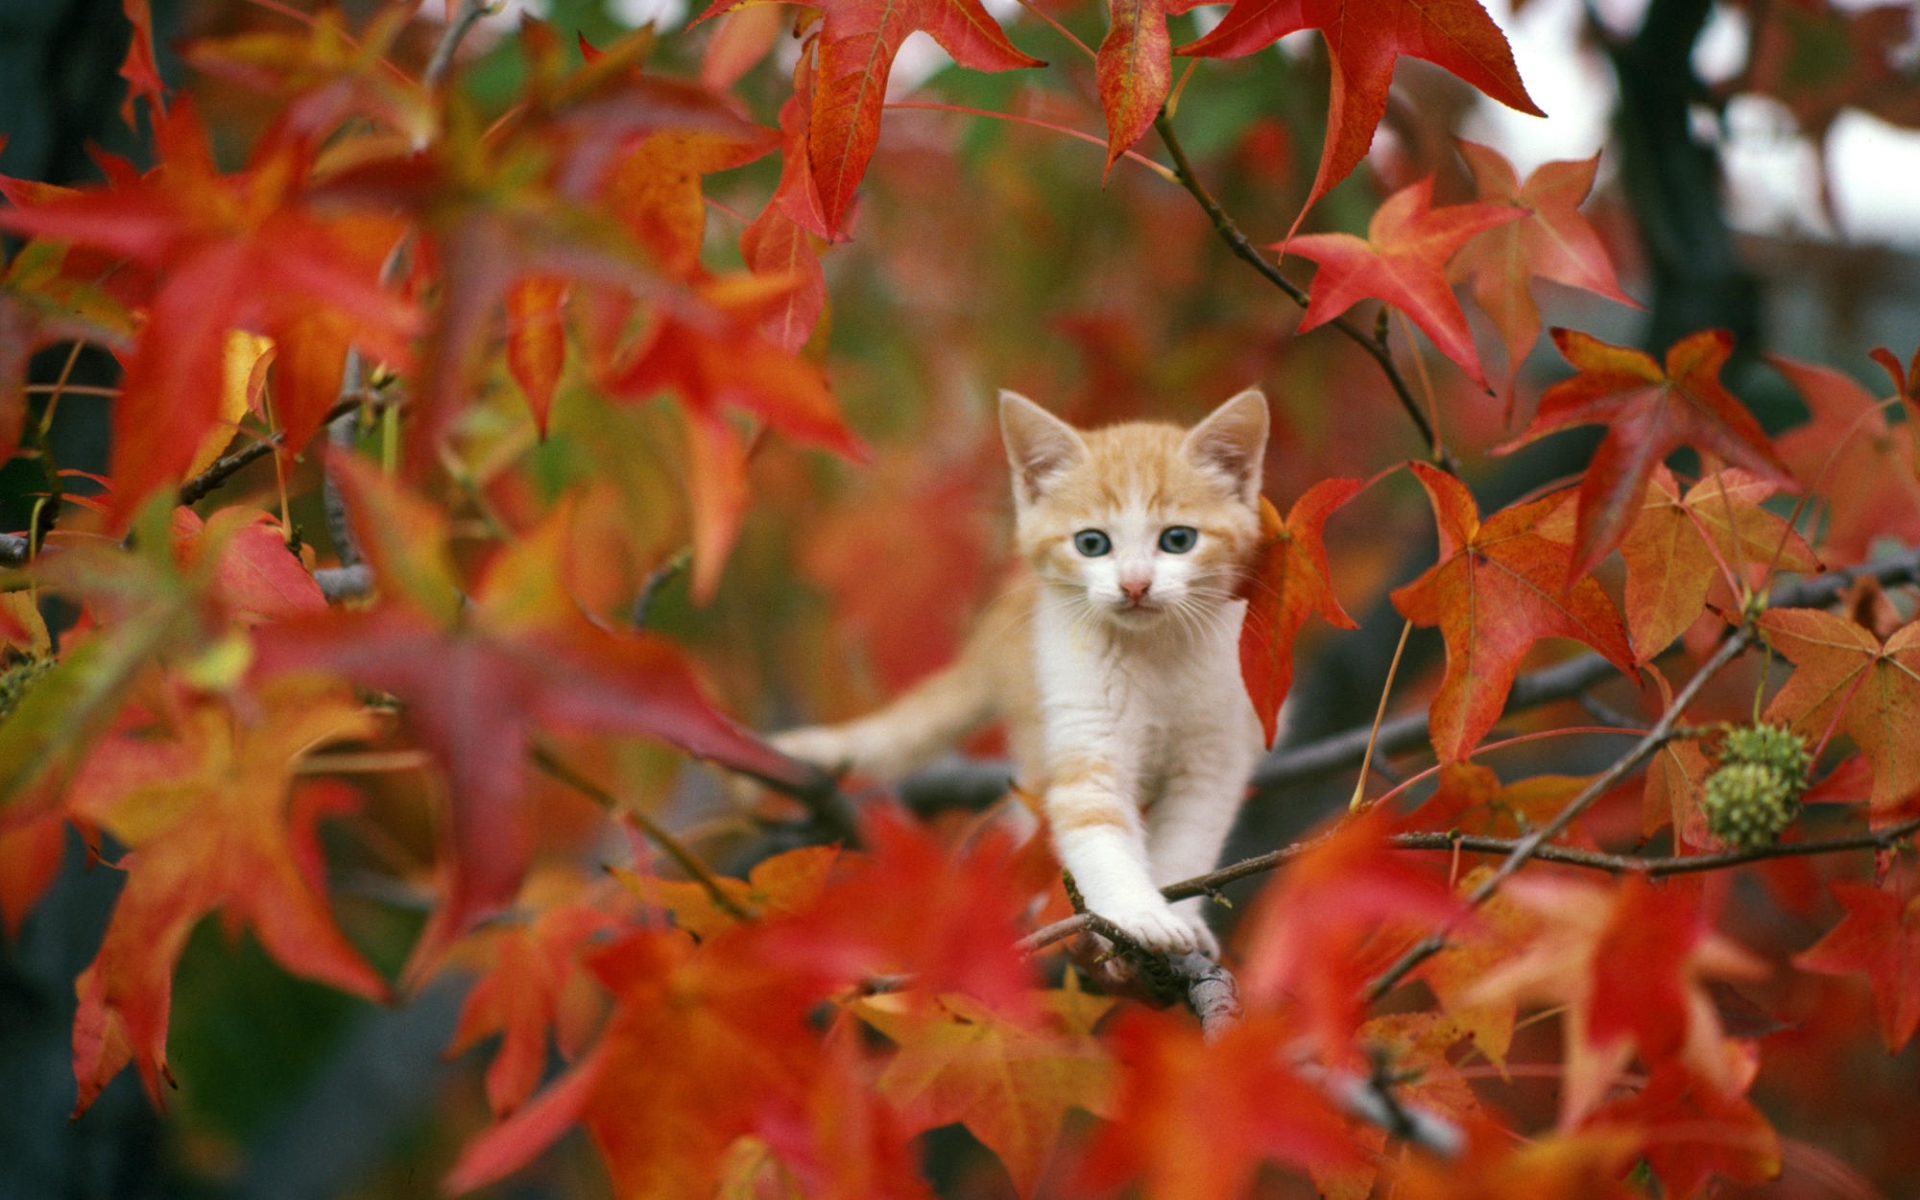 Animals cats kittens fur face whiskers trees autumn fall seasons ...